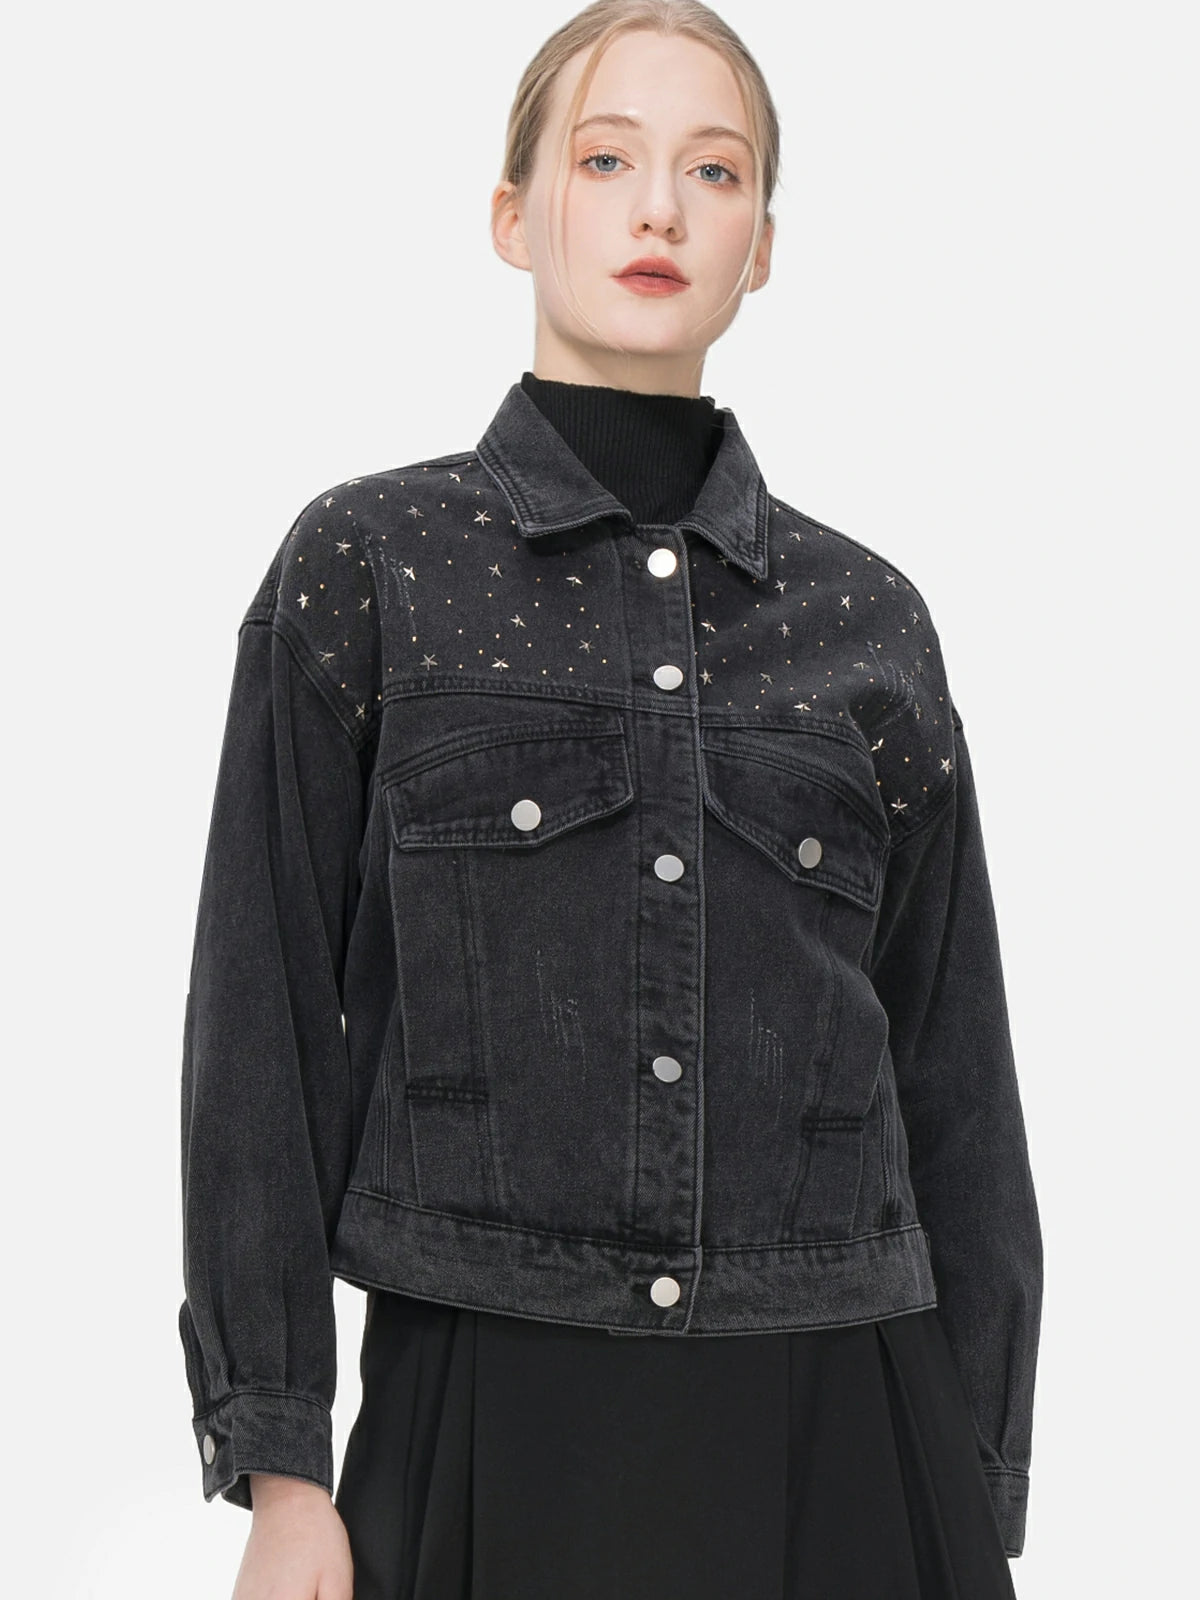 Elevate your style with this short denim jacket featuring star-shaped bead embellishments, striking the perfect balance between fashion and individuality for a standout wardrobe choice.